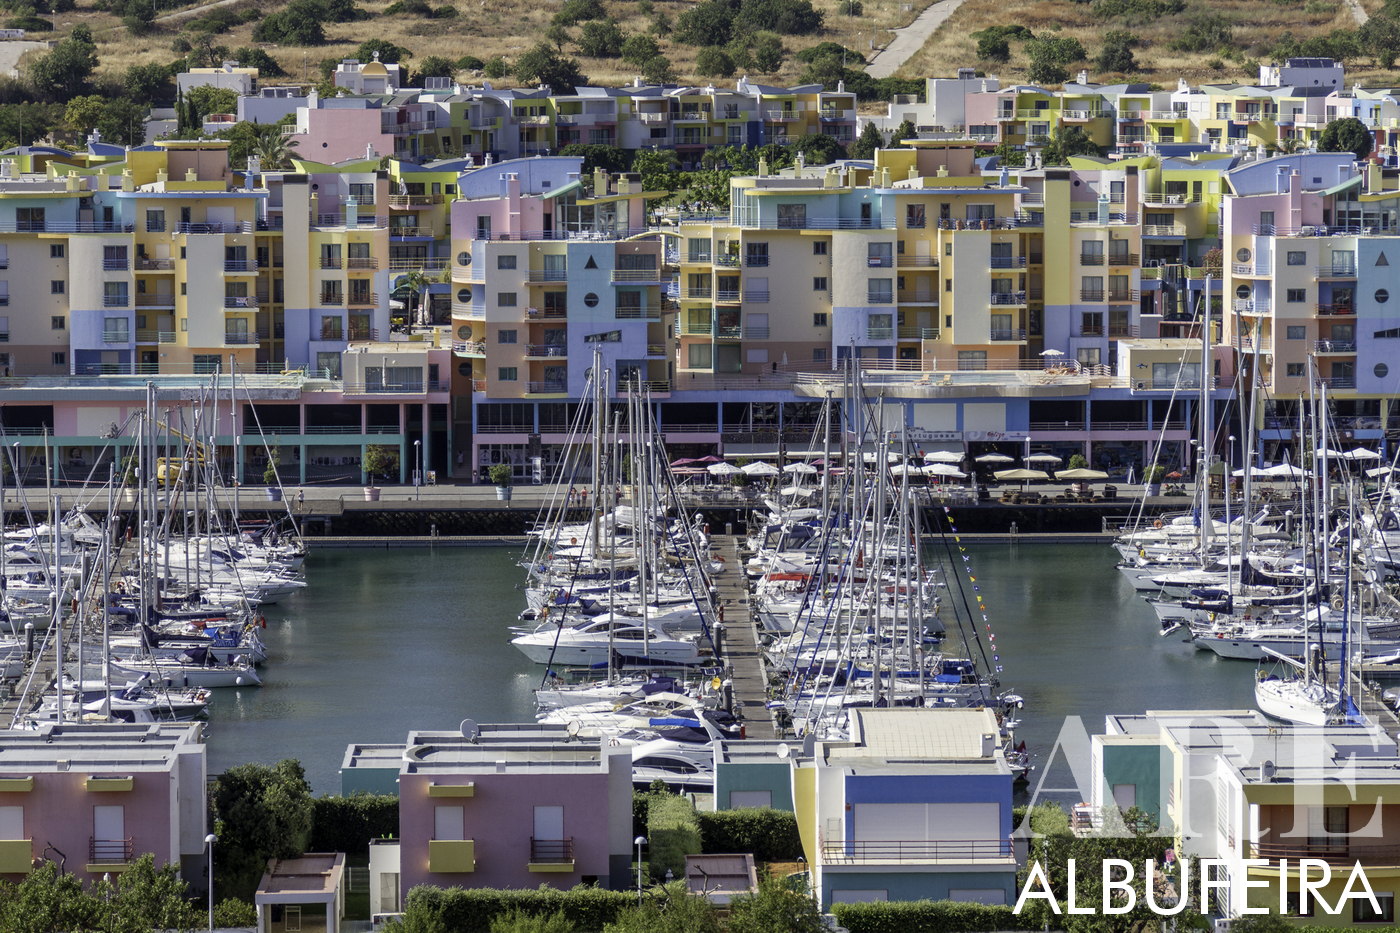 Albufeira Marina, featuring the distinctive yellow, blue, pink, and orange buildings designed by renowned architect Taveira. Serving as the departure point for tours to the Benagil cave, dolphin watching, and diving, it's home to the famed Zen Mar boat trips operated by Marco and Anne. The marina is also adorned with restaurants, making it a prime spot for relaxation and culinary delights.